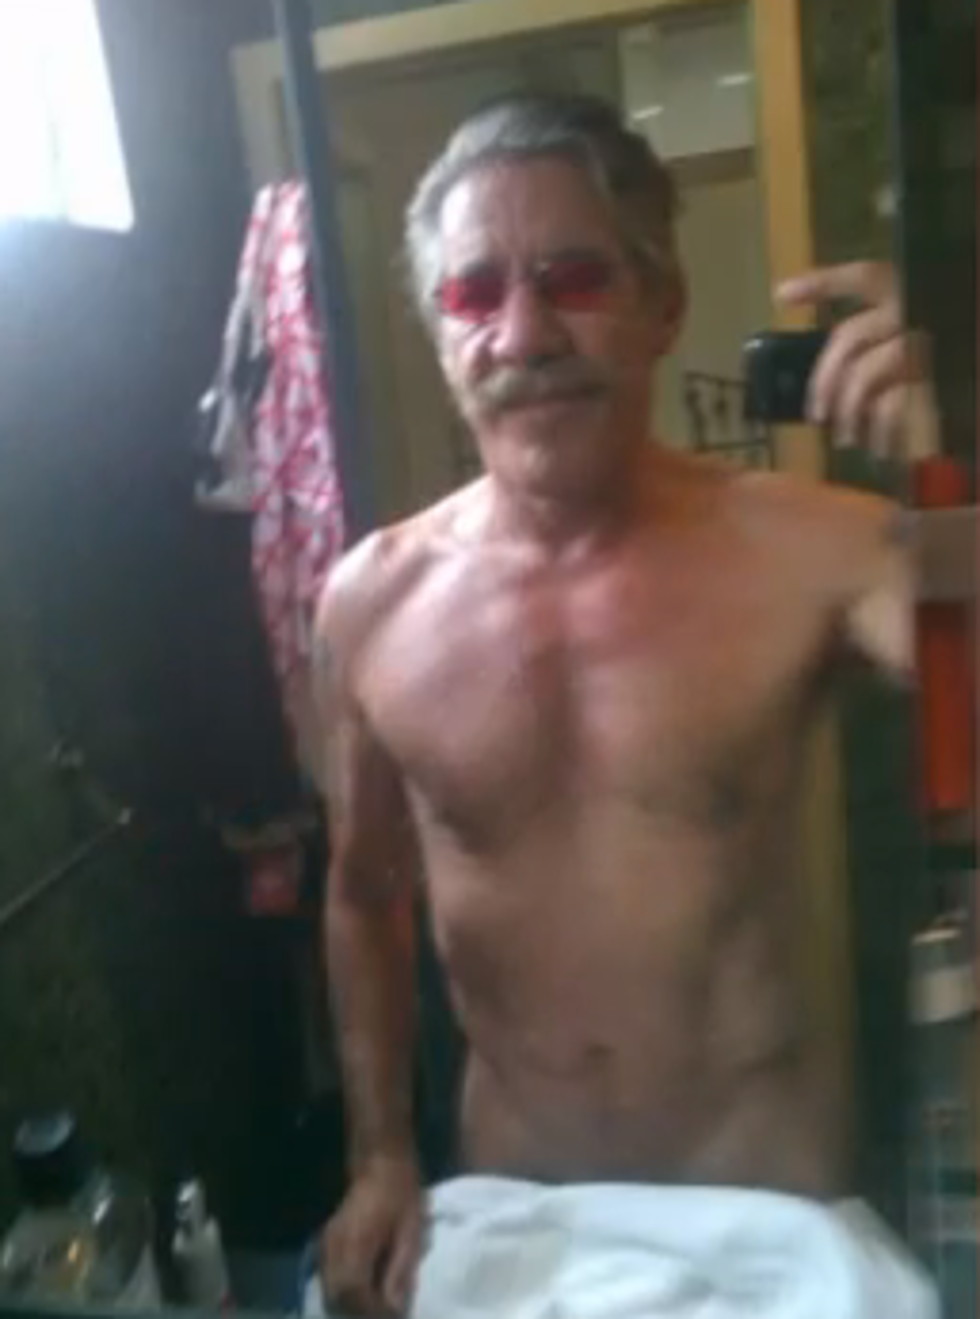 Geraldo Rivera Half Naked on Twitter – Do You Stay in Shape? [POLL]